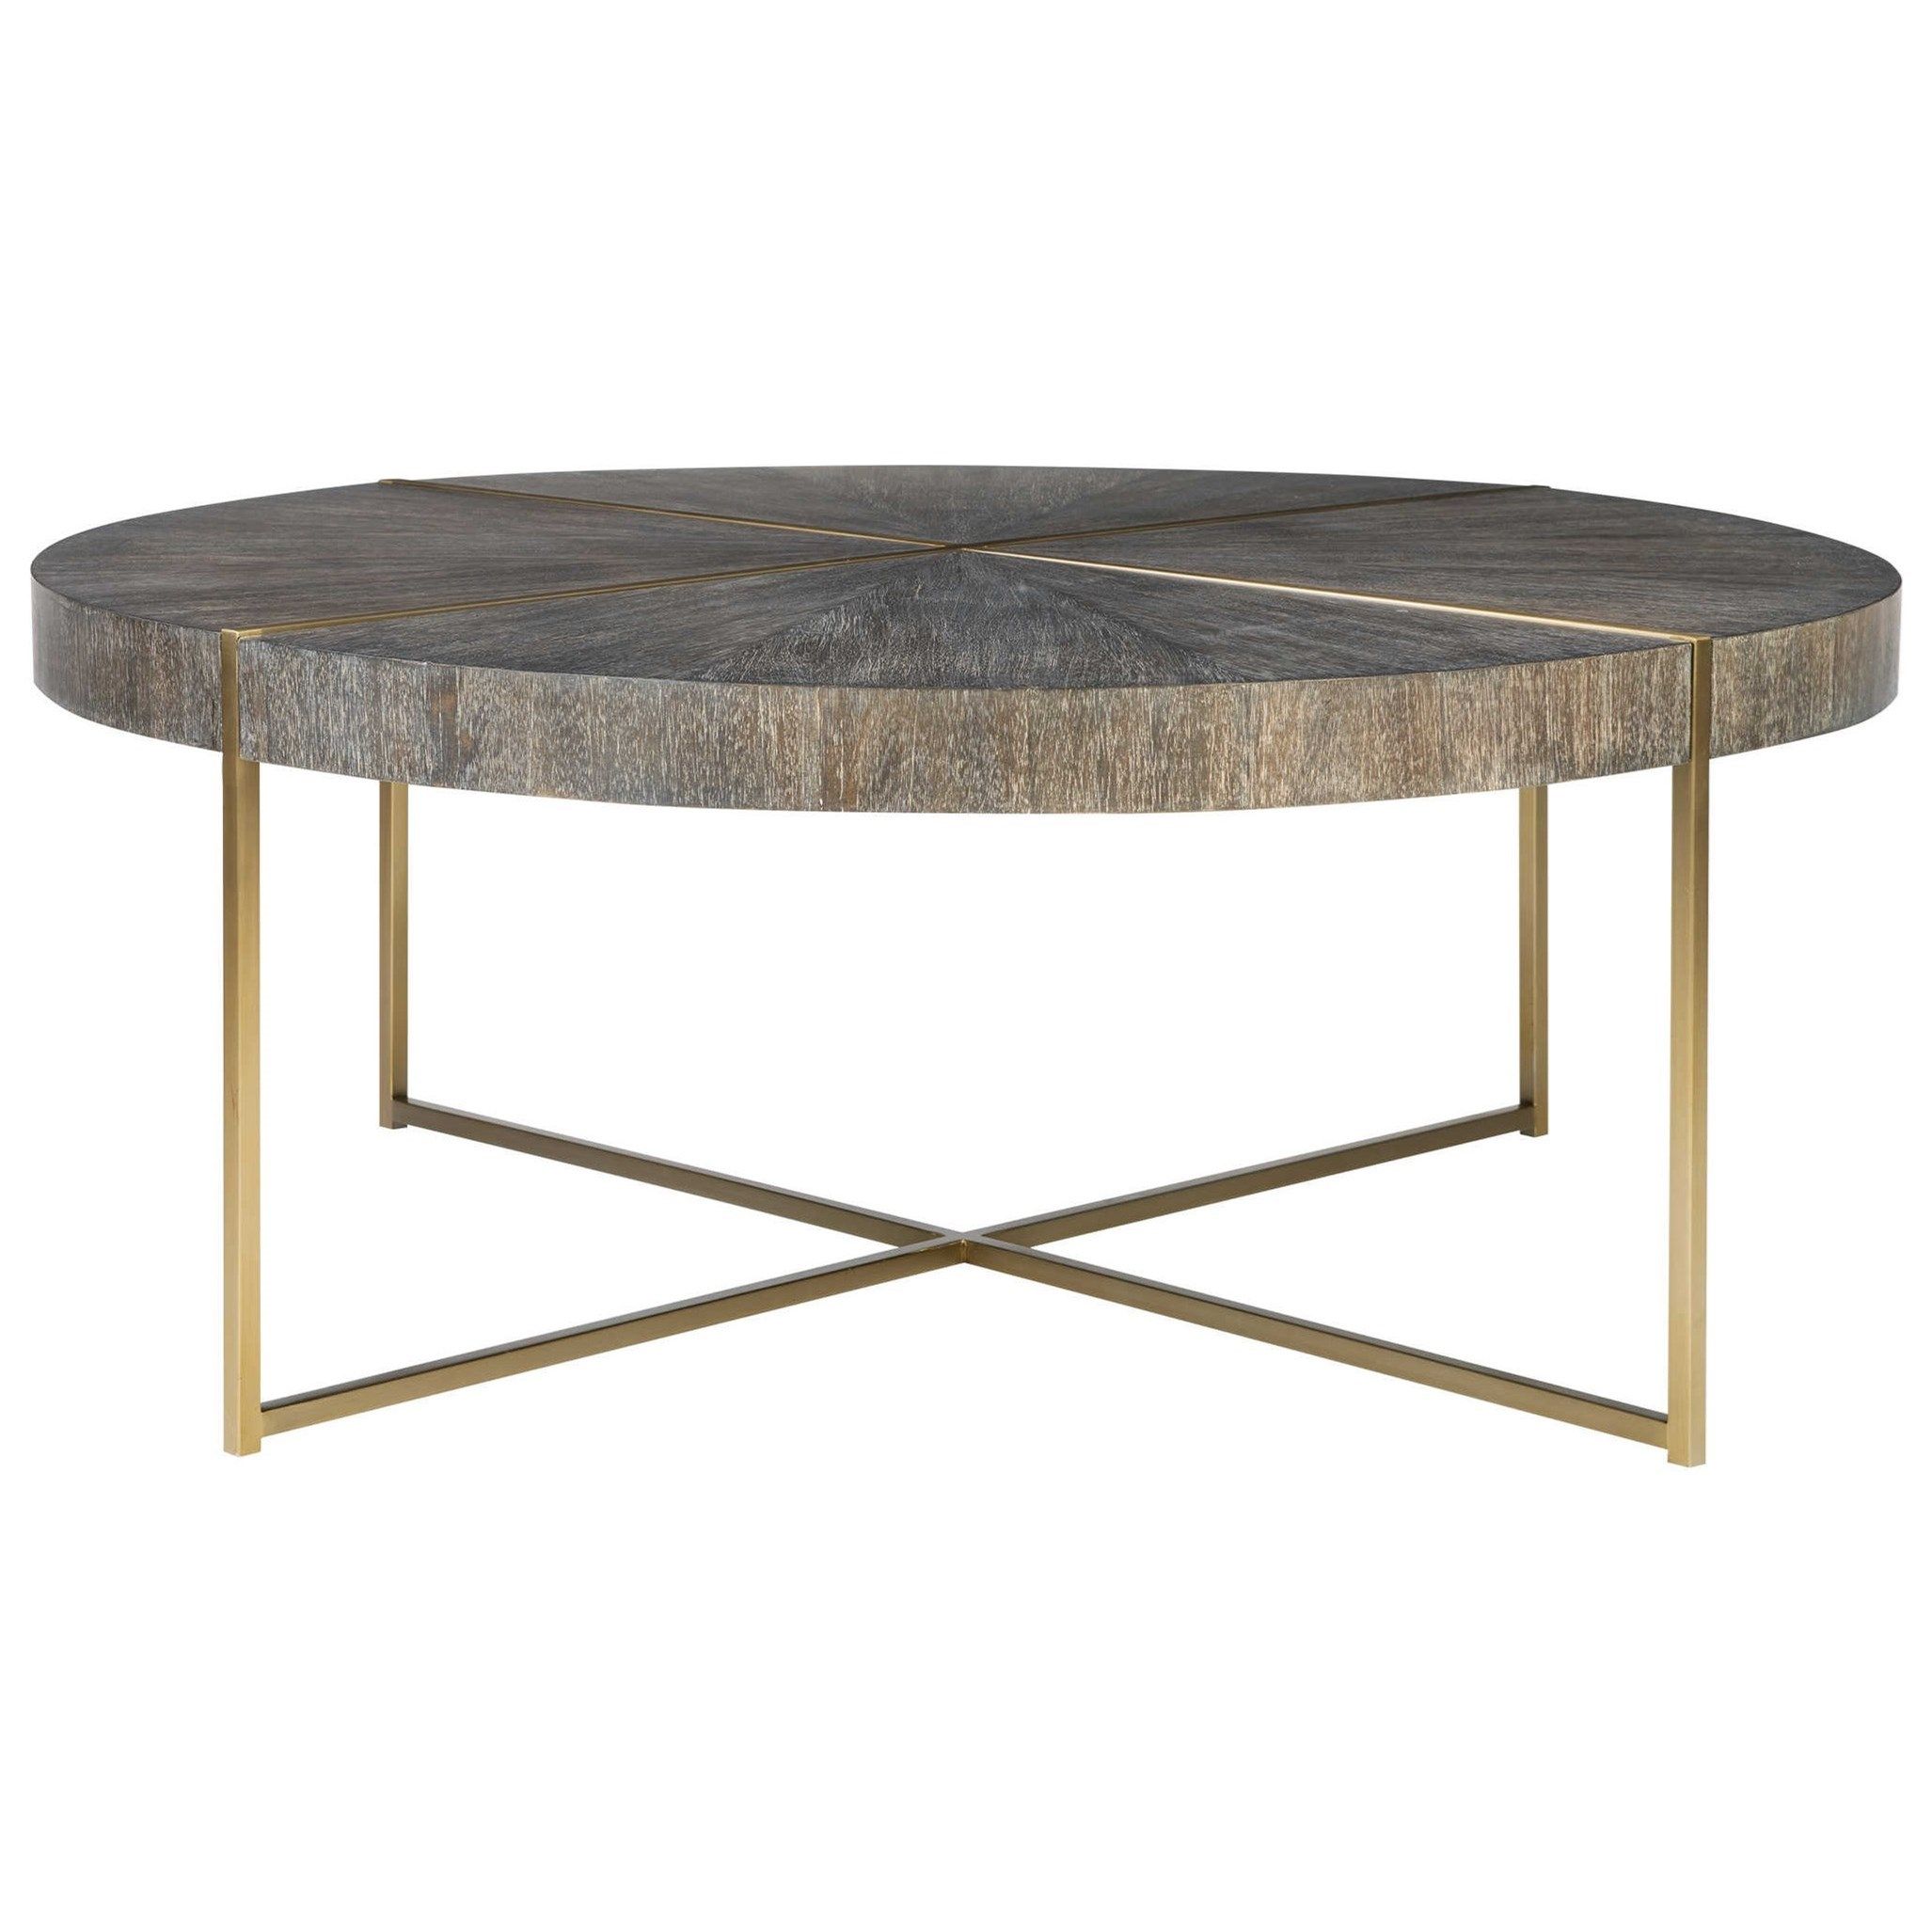 Uttermost Accent Furniture – Occasional Tables Taja Round Coffee Table Intended For Occasional Coffee Tables (View 14 of 15)